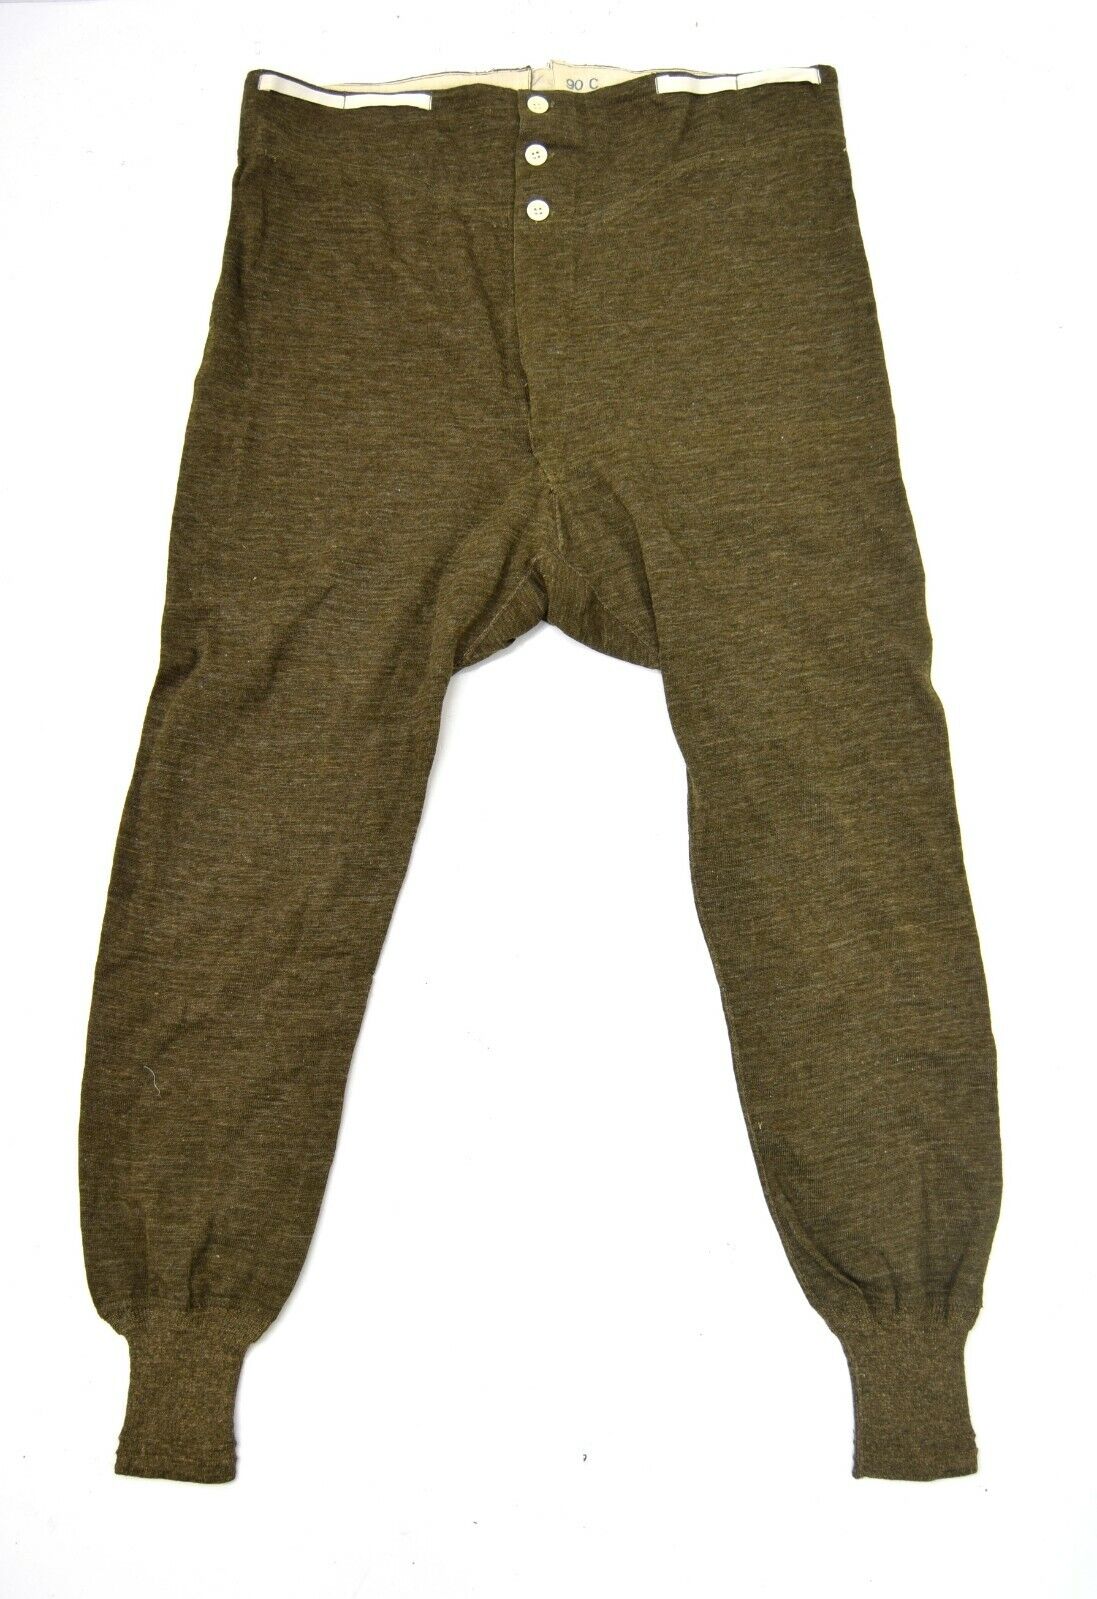 French Army 1940's Dated Long Johns Thermal Bottoms Rare Vintage Cotton Wool 